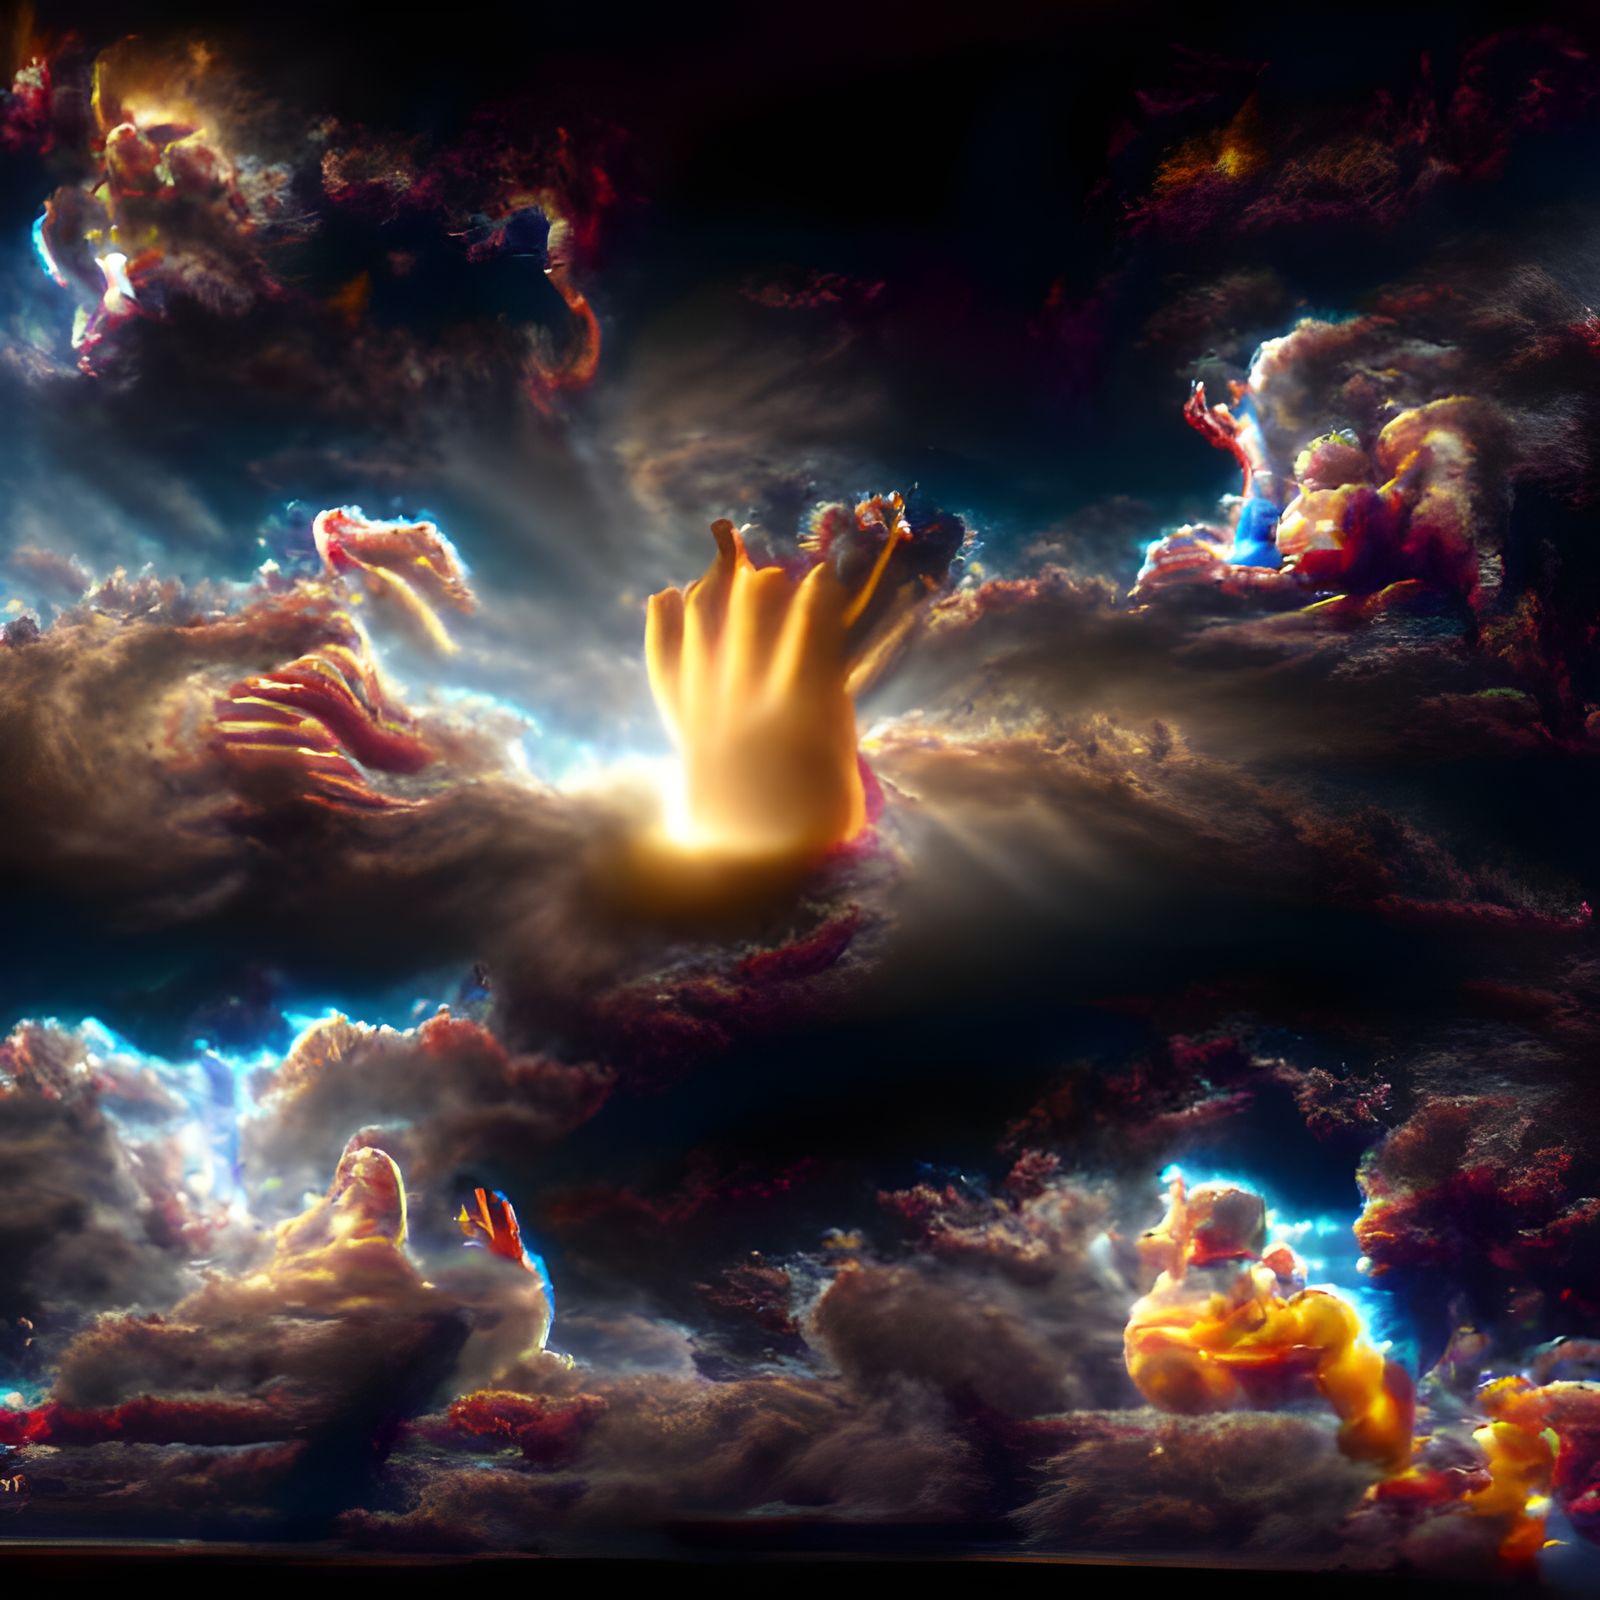 The Almighty One's Hand